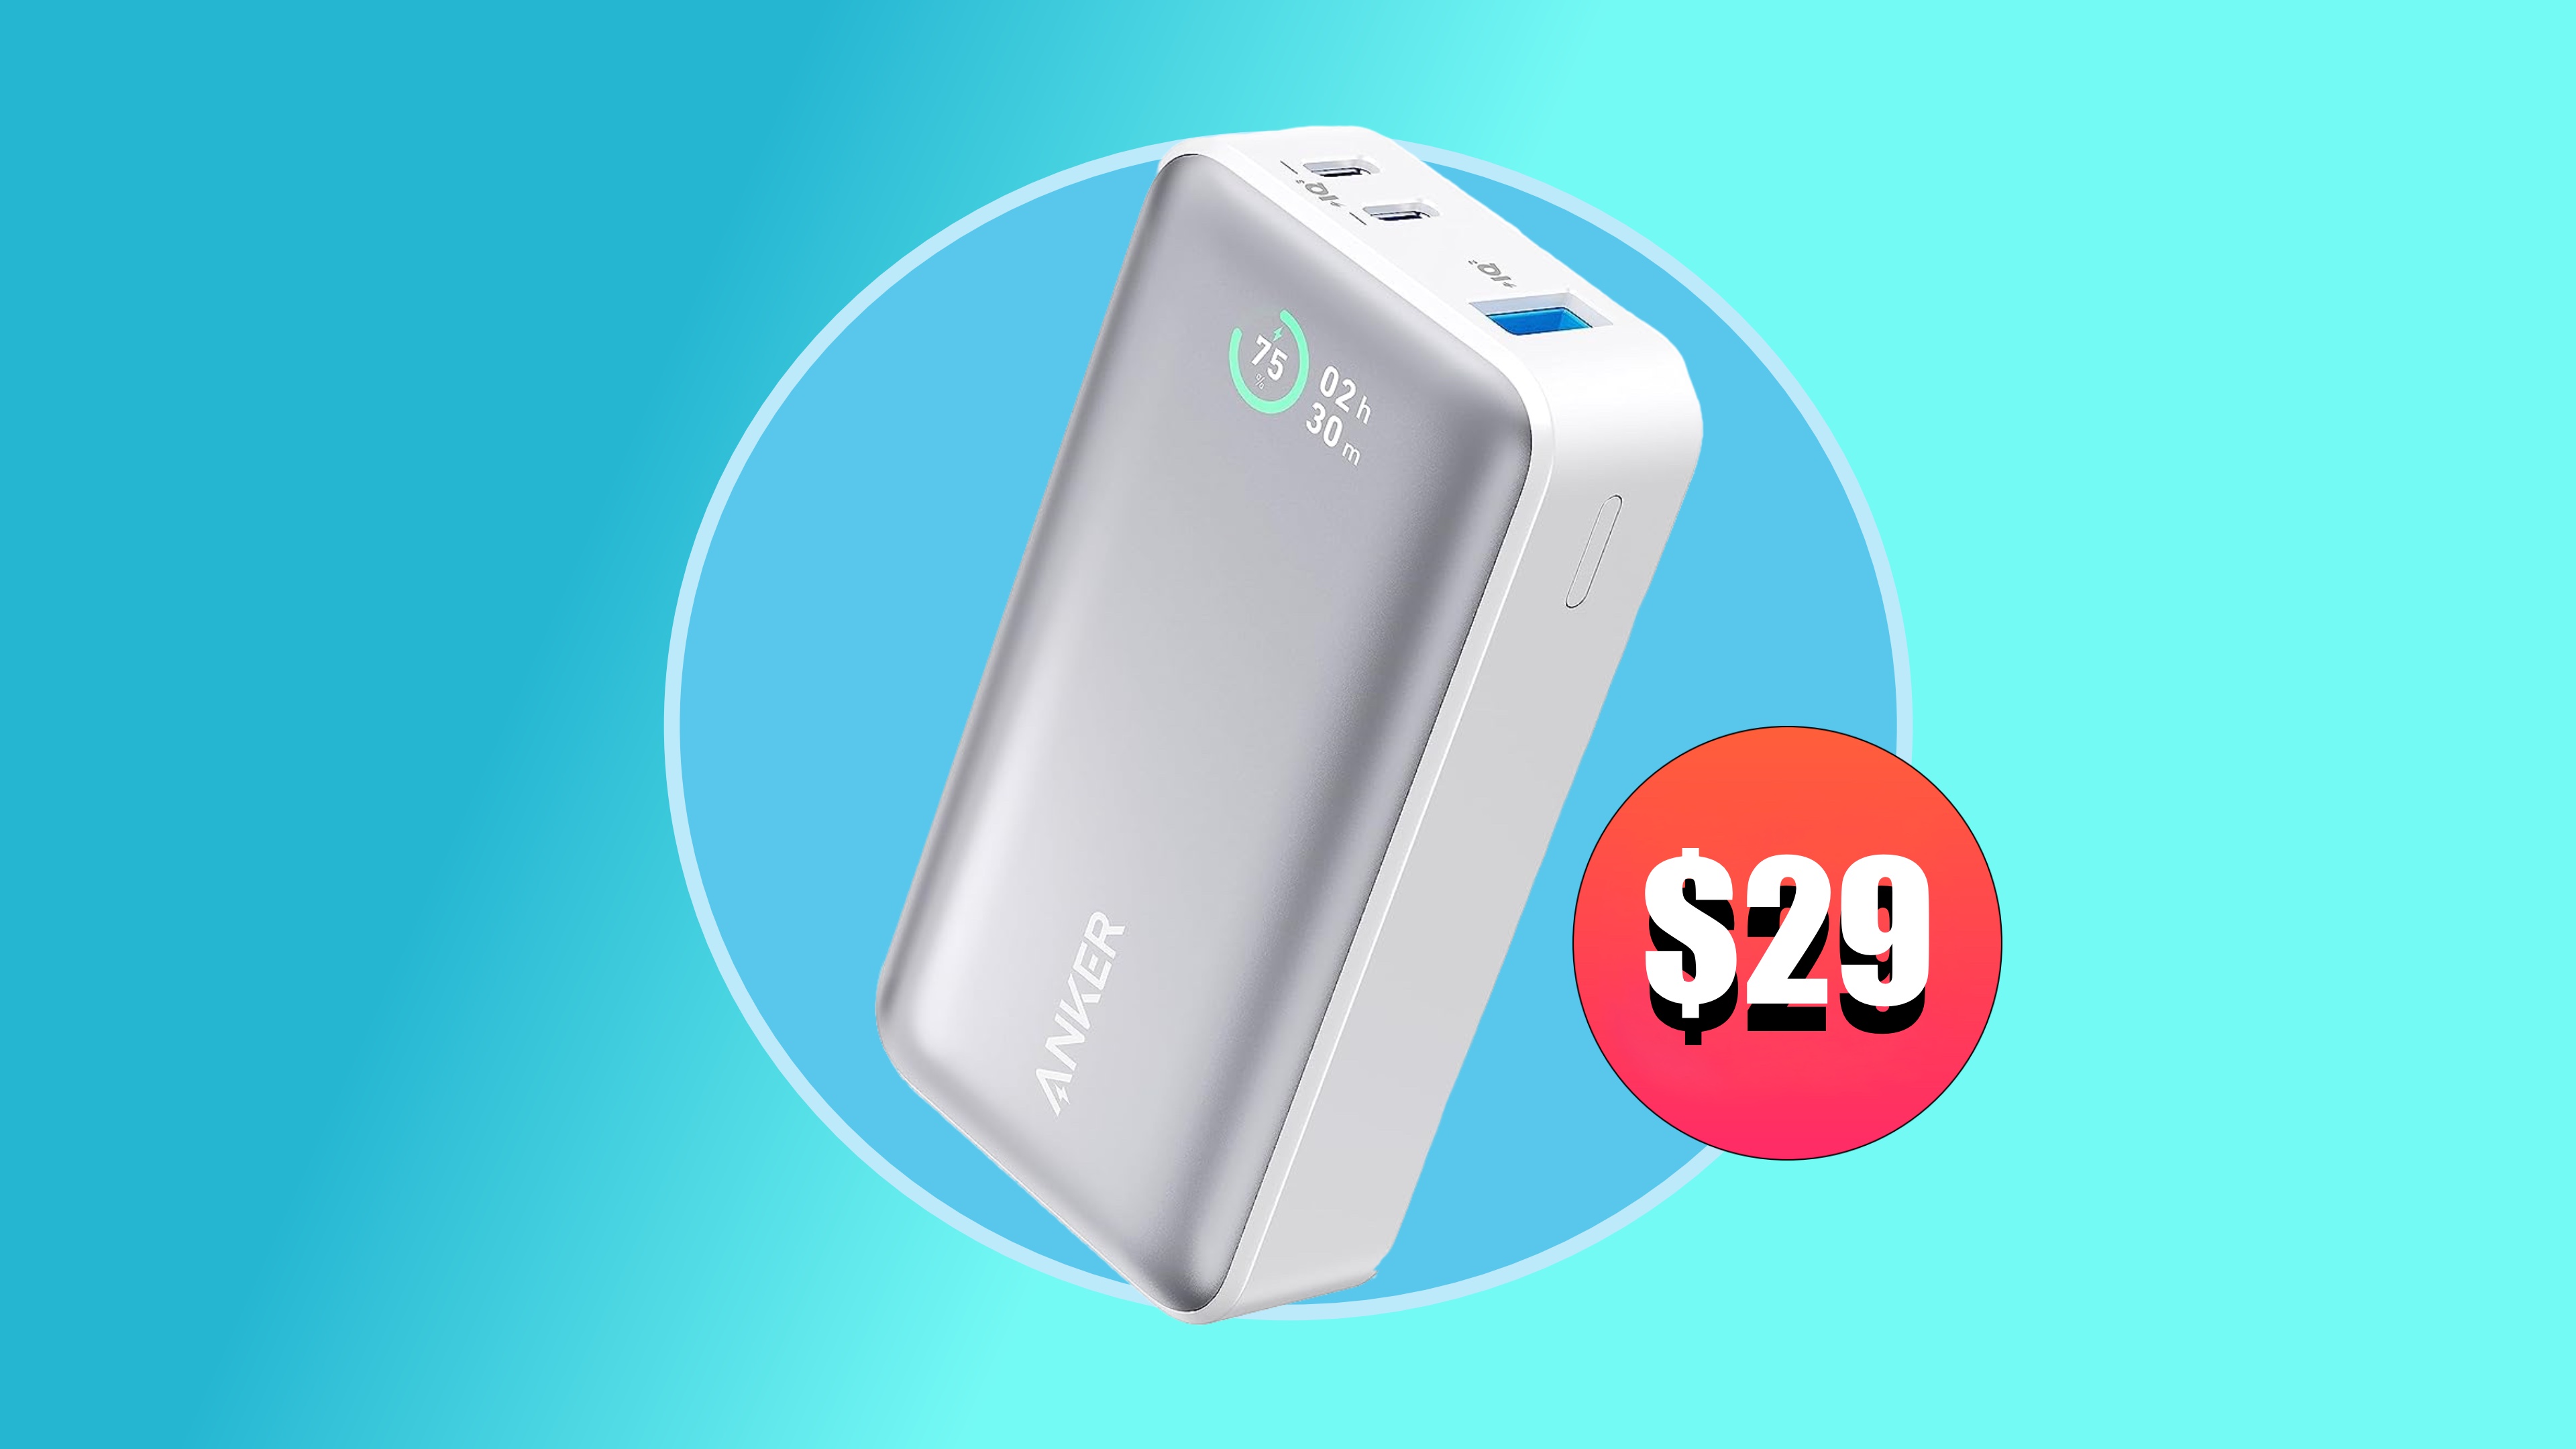 Up your portable charging game for just $29 with this Anker power bank deal